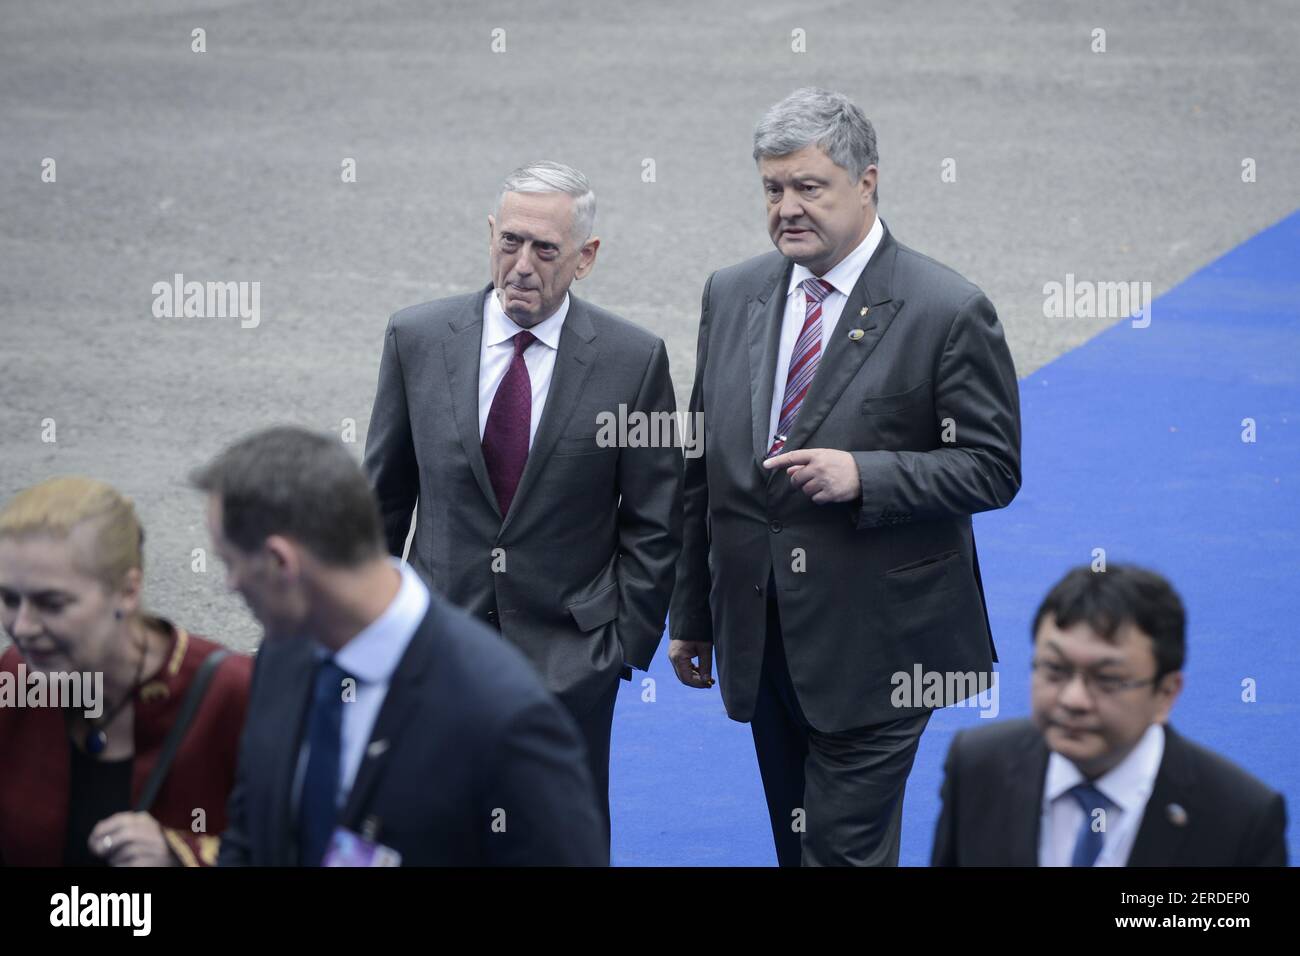 US secretary of defence James Mattis (L) and Ukrainian president Petro Poroshenko (R) are seen arriving at the Cinquantenaire museum for the NATO dinner on July 11, 2018 in Brussels, Belgium. Ukraine has been attempting to secure US help in fighting Russia backed insurgents in the Eastern part of the country. (Photo by Jaap Arriens / Sipa USA) Stock Photo